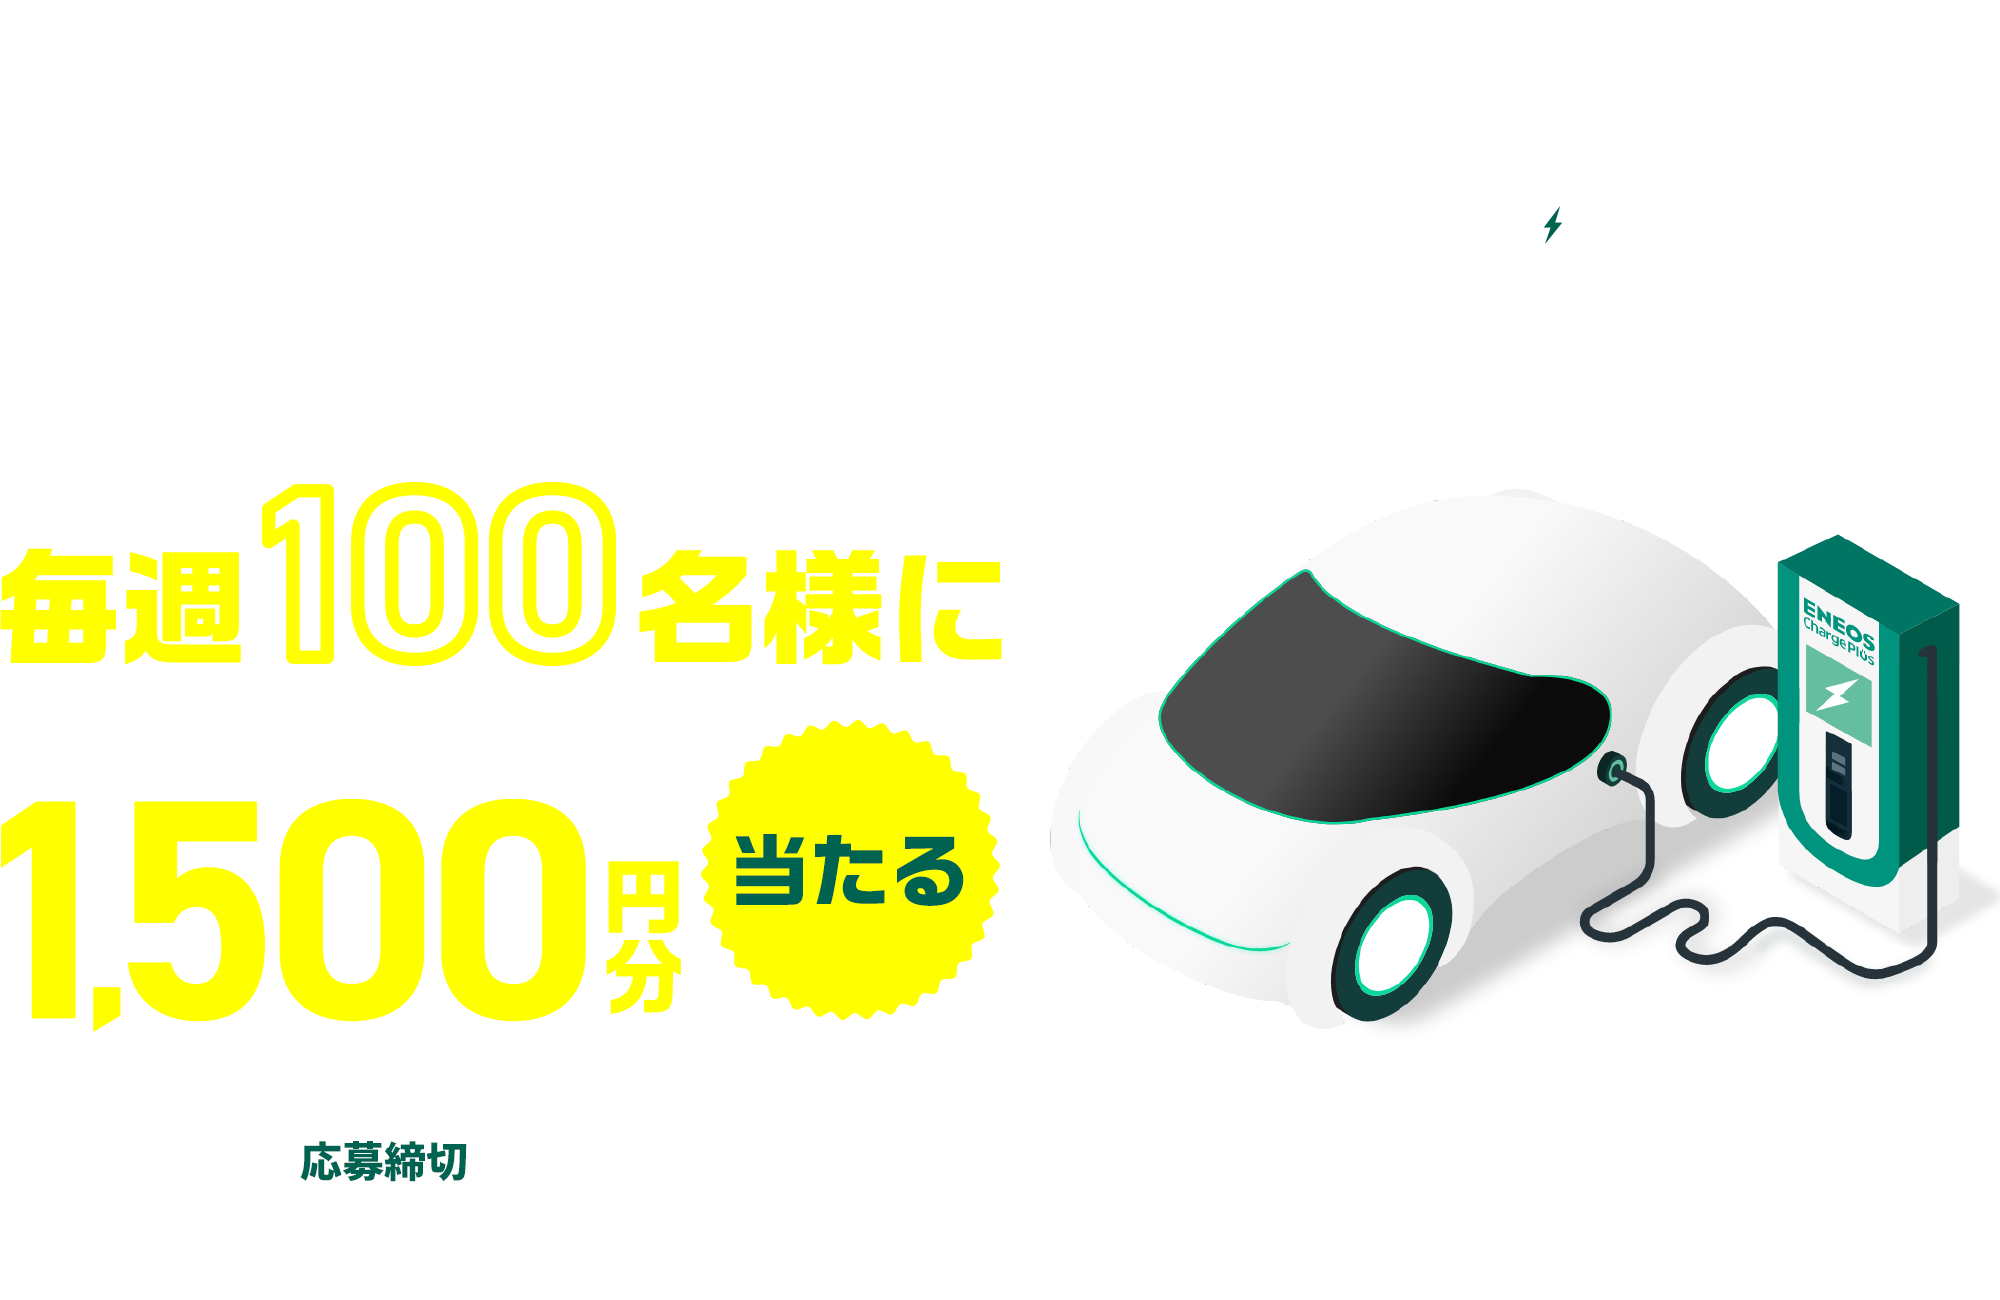 ENEOS Charge Plus キャンペーン実施中！